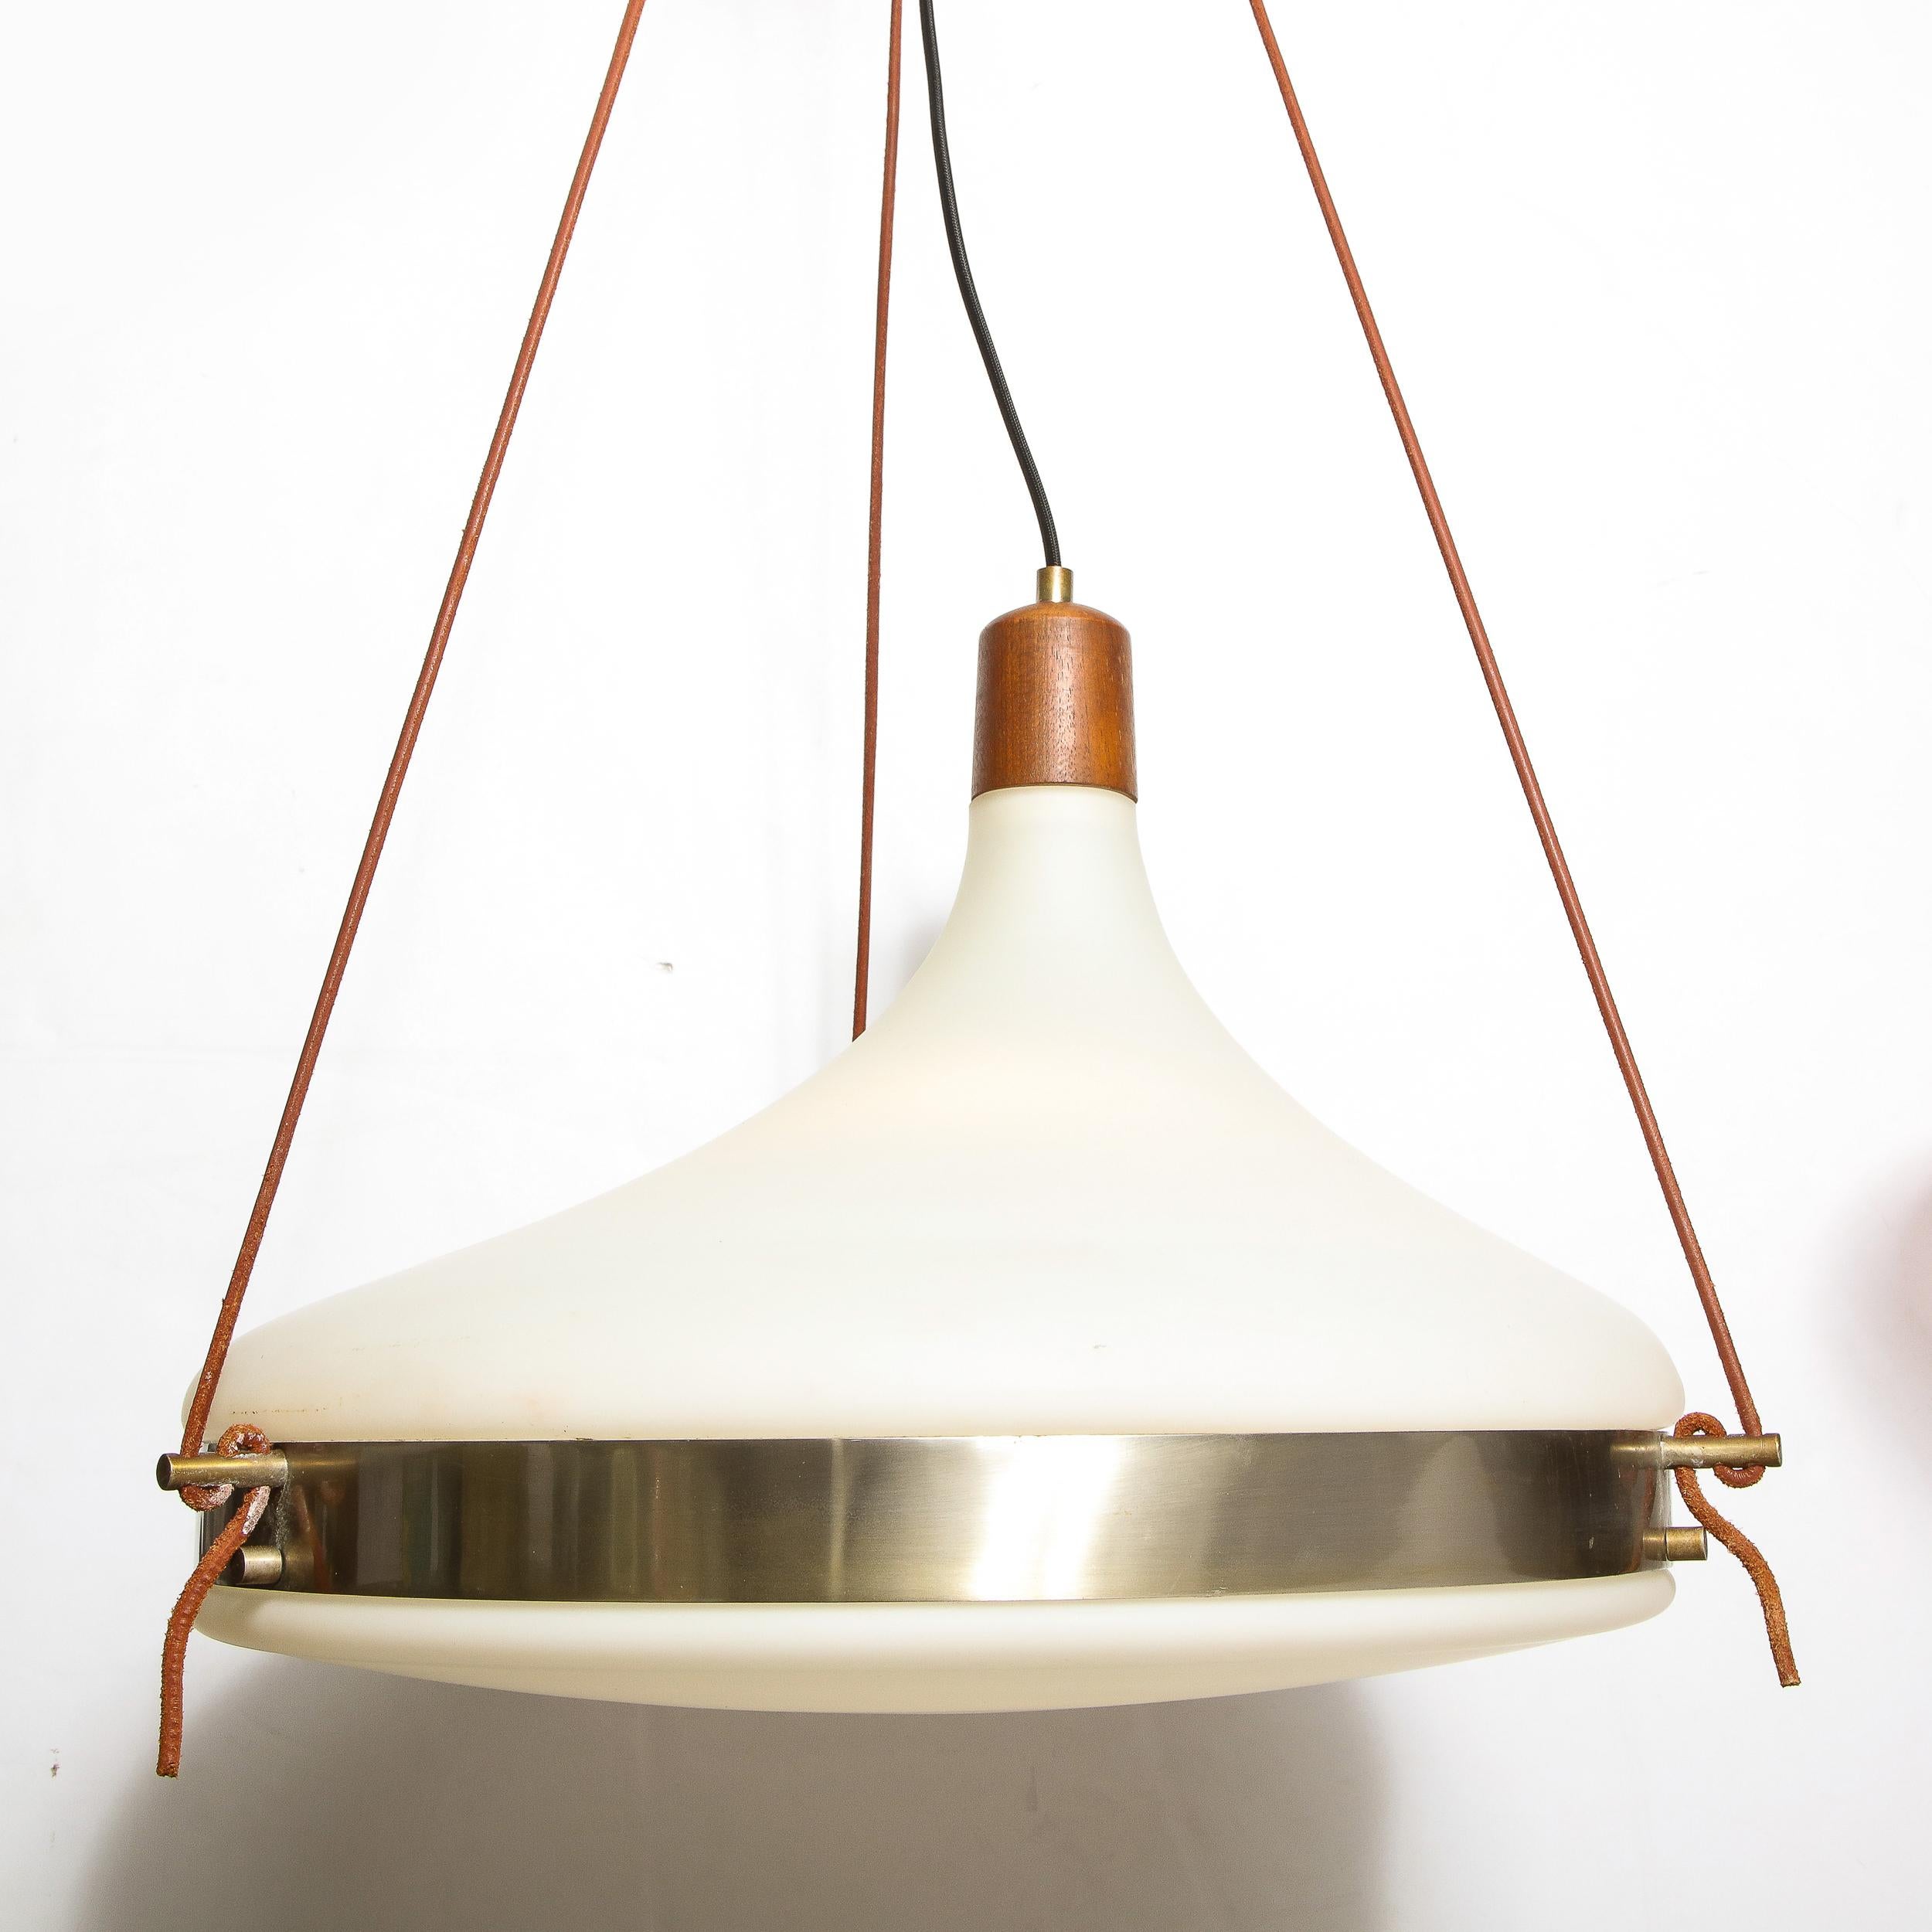 This refined Mid-Century Modern chandelier was realized in Murano, Italy- the island off the coast of Venice renowned for centuries for its superlative glass production. Executed in handblown white Murano glass, brass with tan leather supports, this